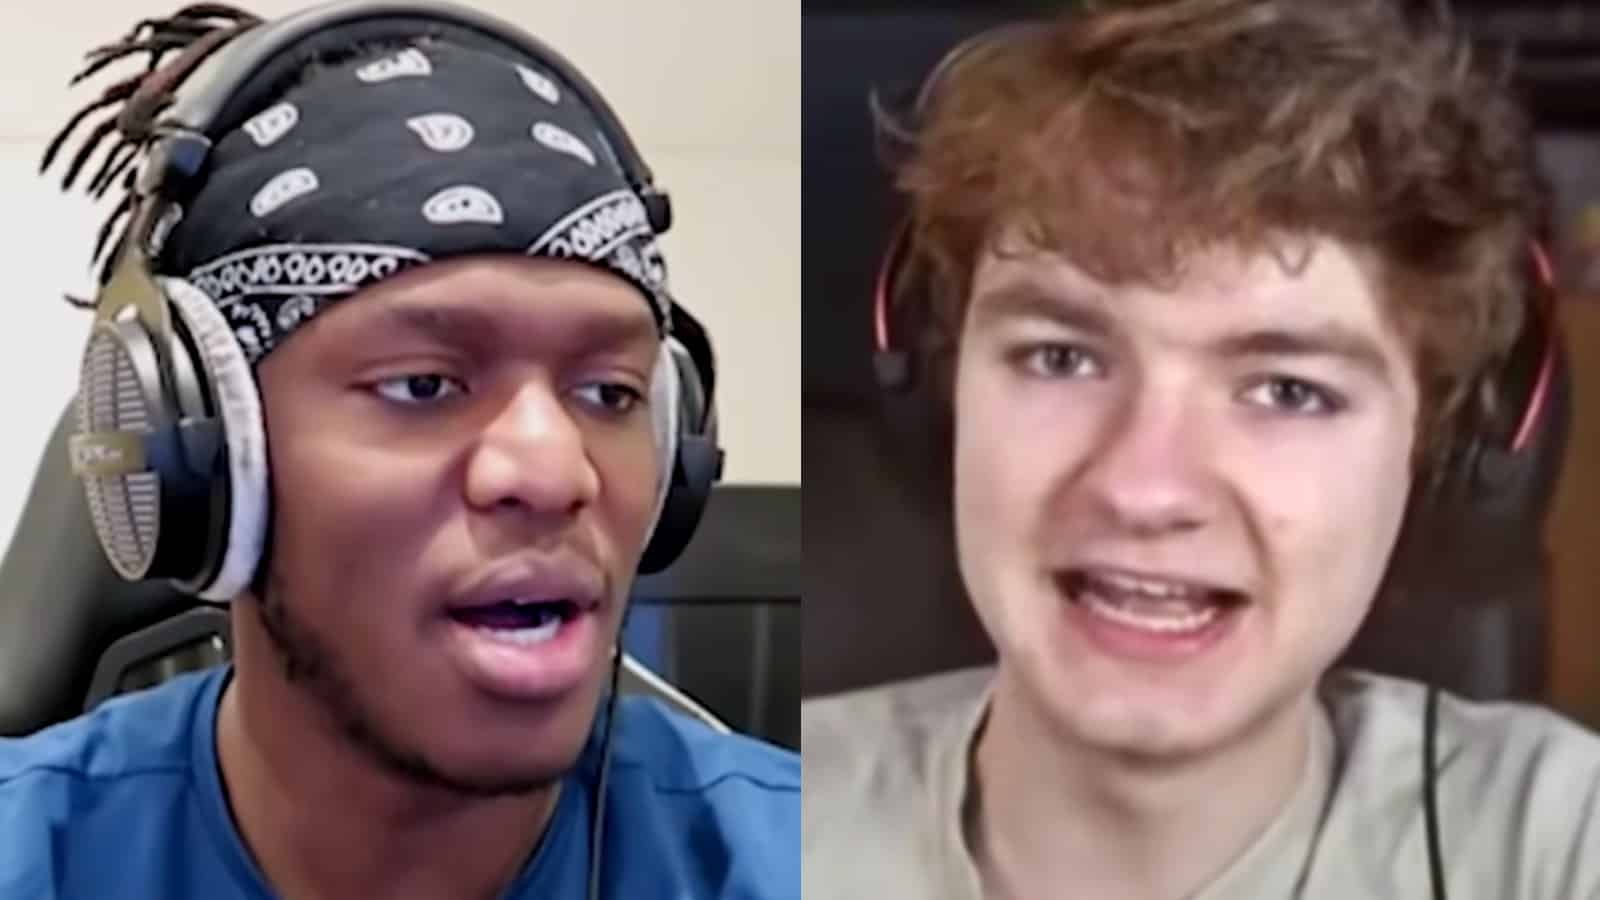 KSI and TommyInnit side by side